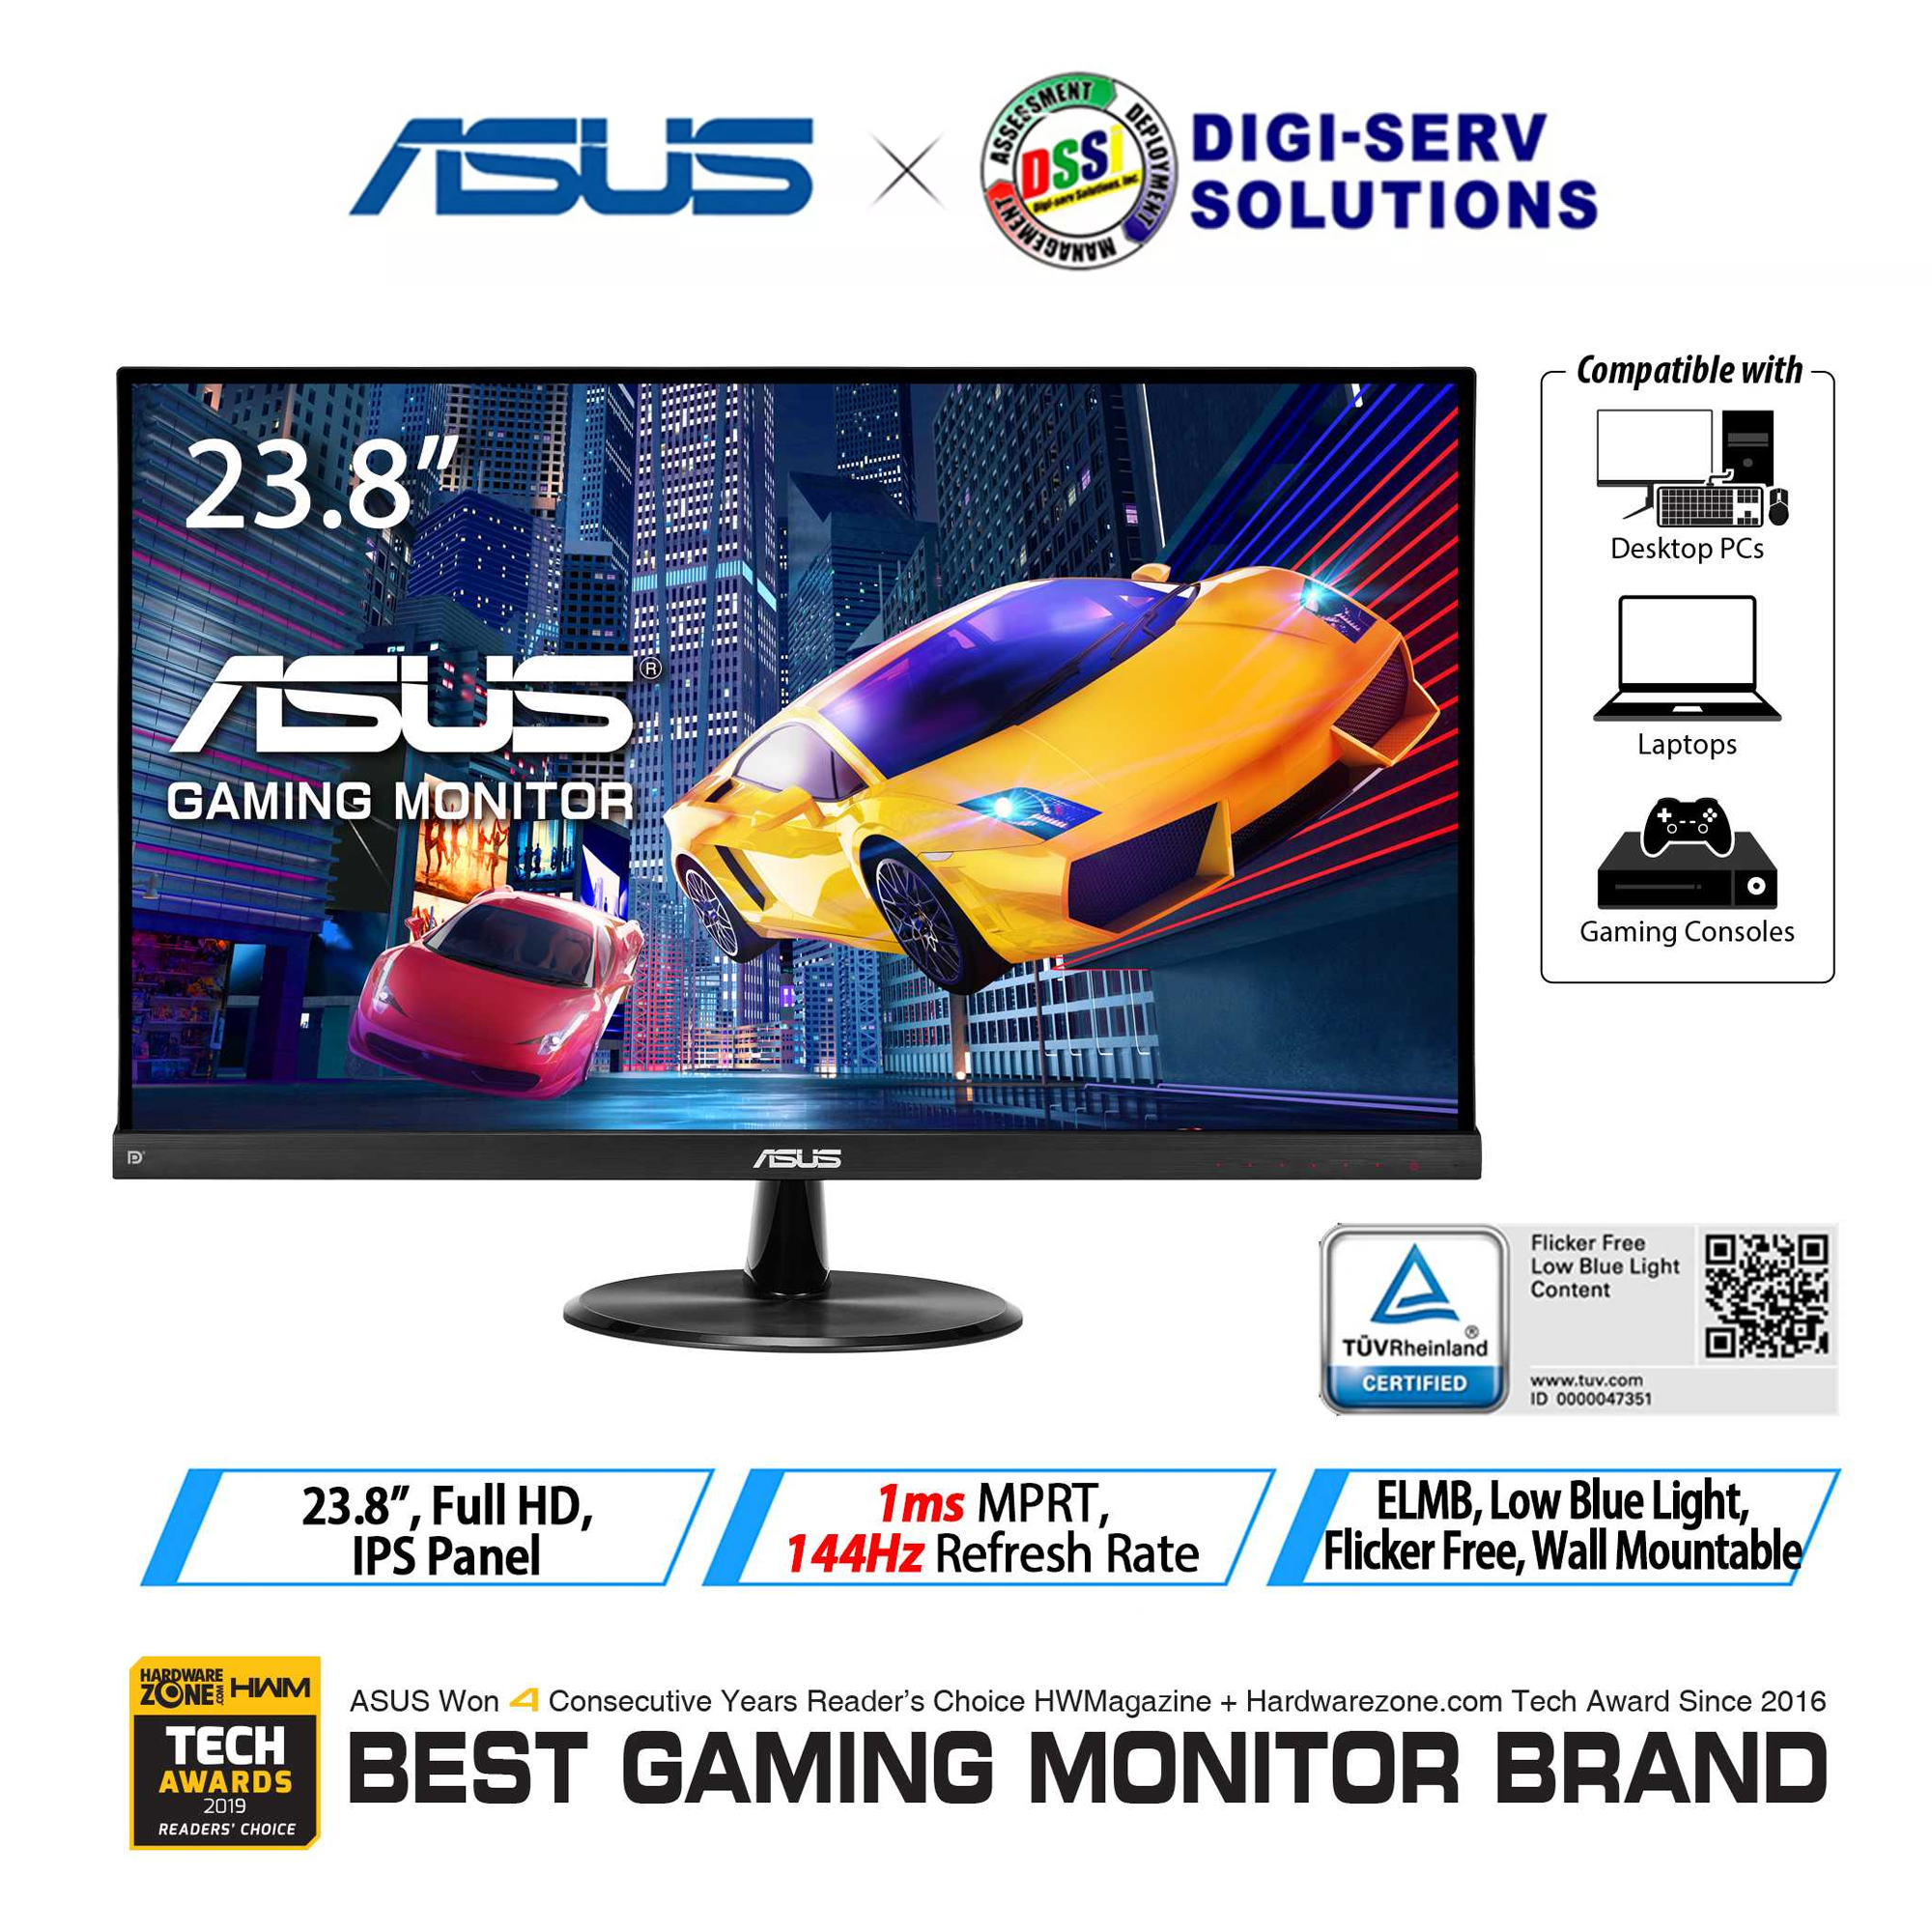 Asus Vp249qgr 24 Full Hd Gaming Monitor With 144hz 1ms Ips Panel Freesync And G Sync Flicker Free Frameless Design Wall Mountable Lazada Ph